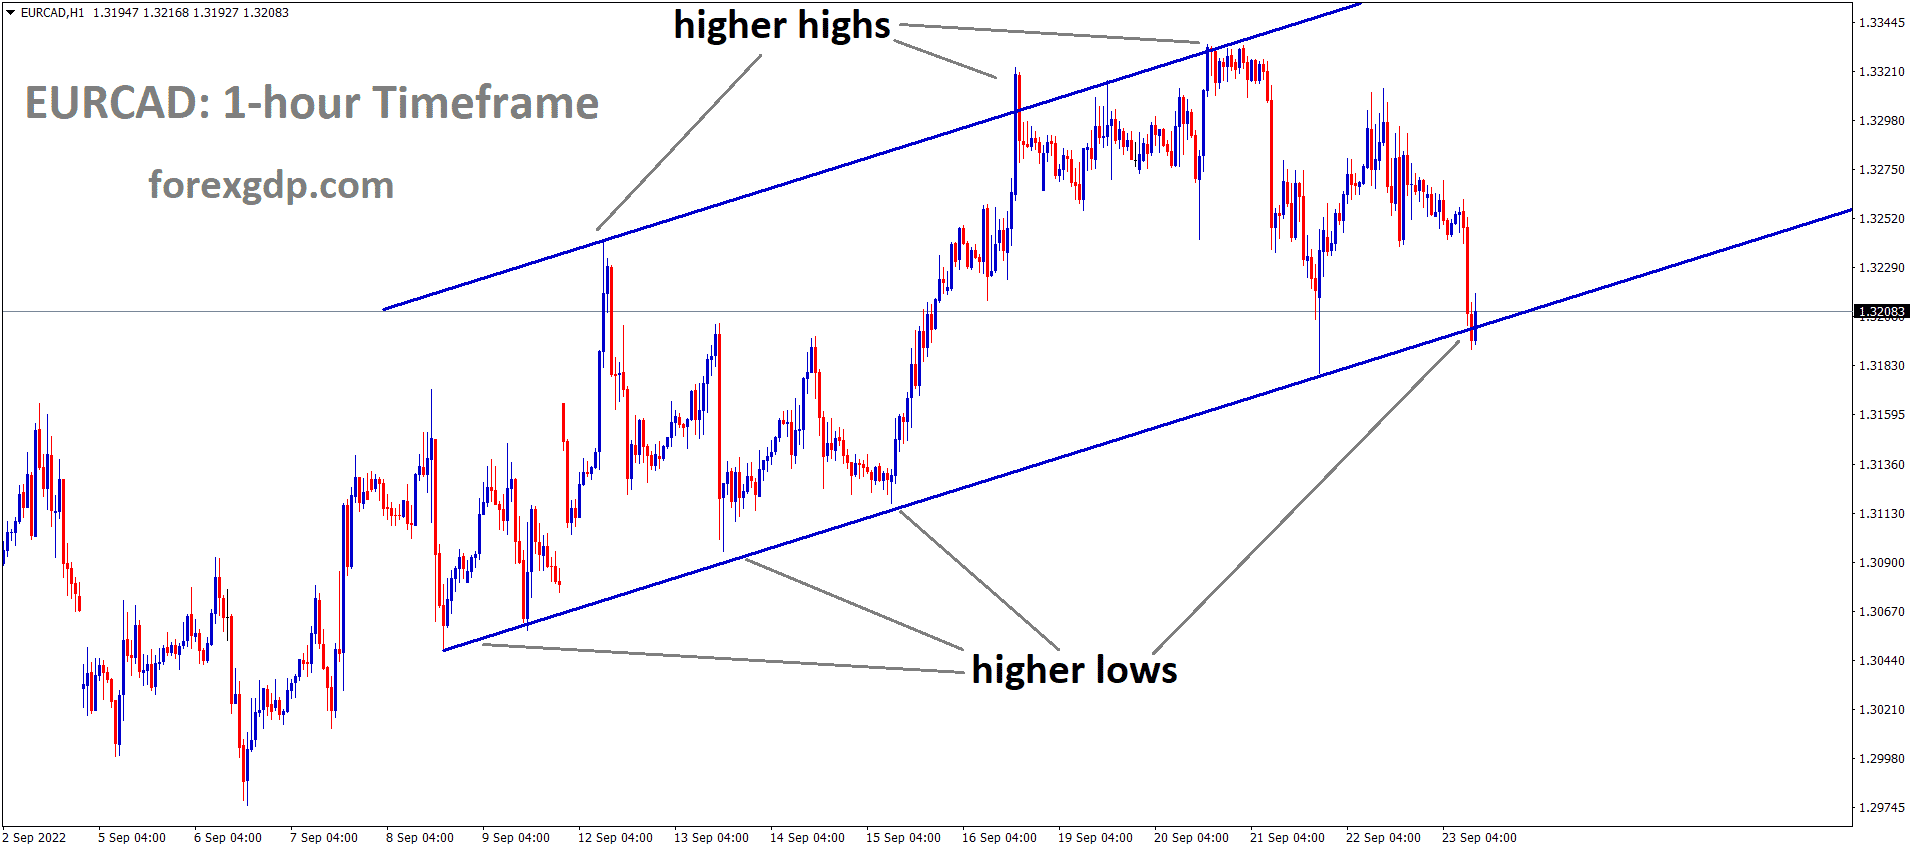 EURCAD is moving in an Ascending channel and the market has reached the higher low area of the channel